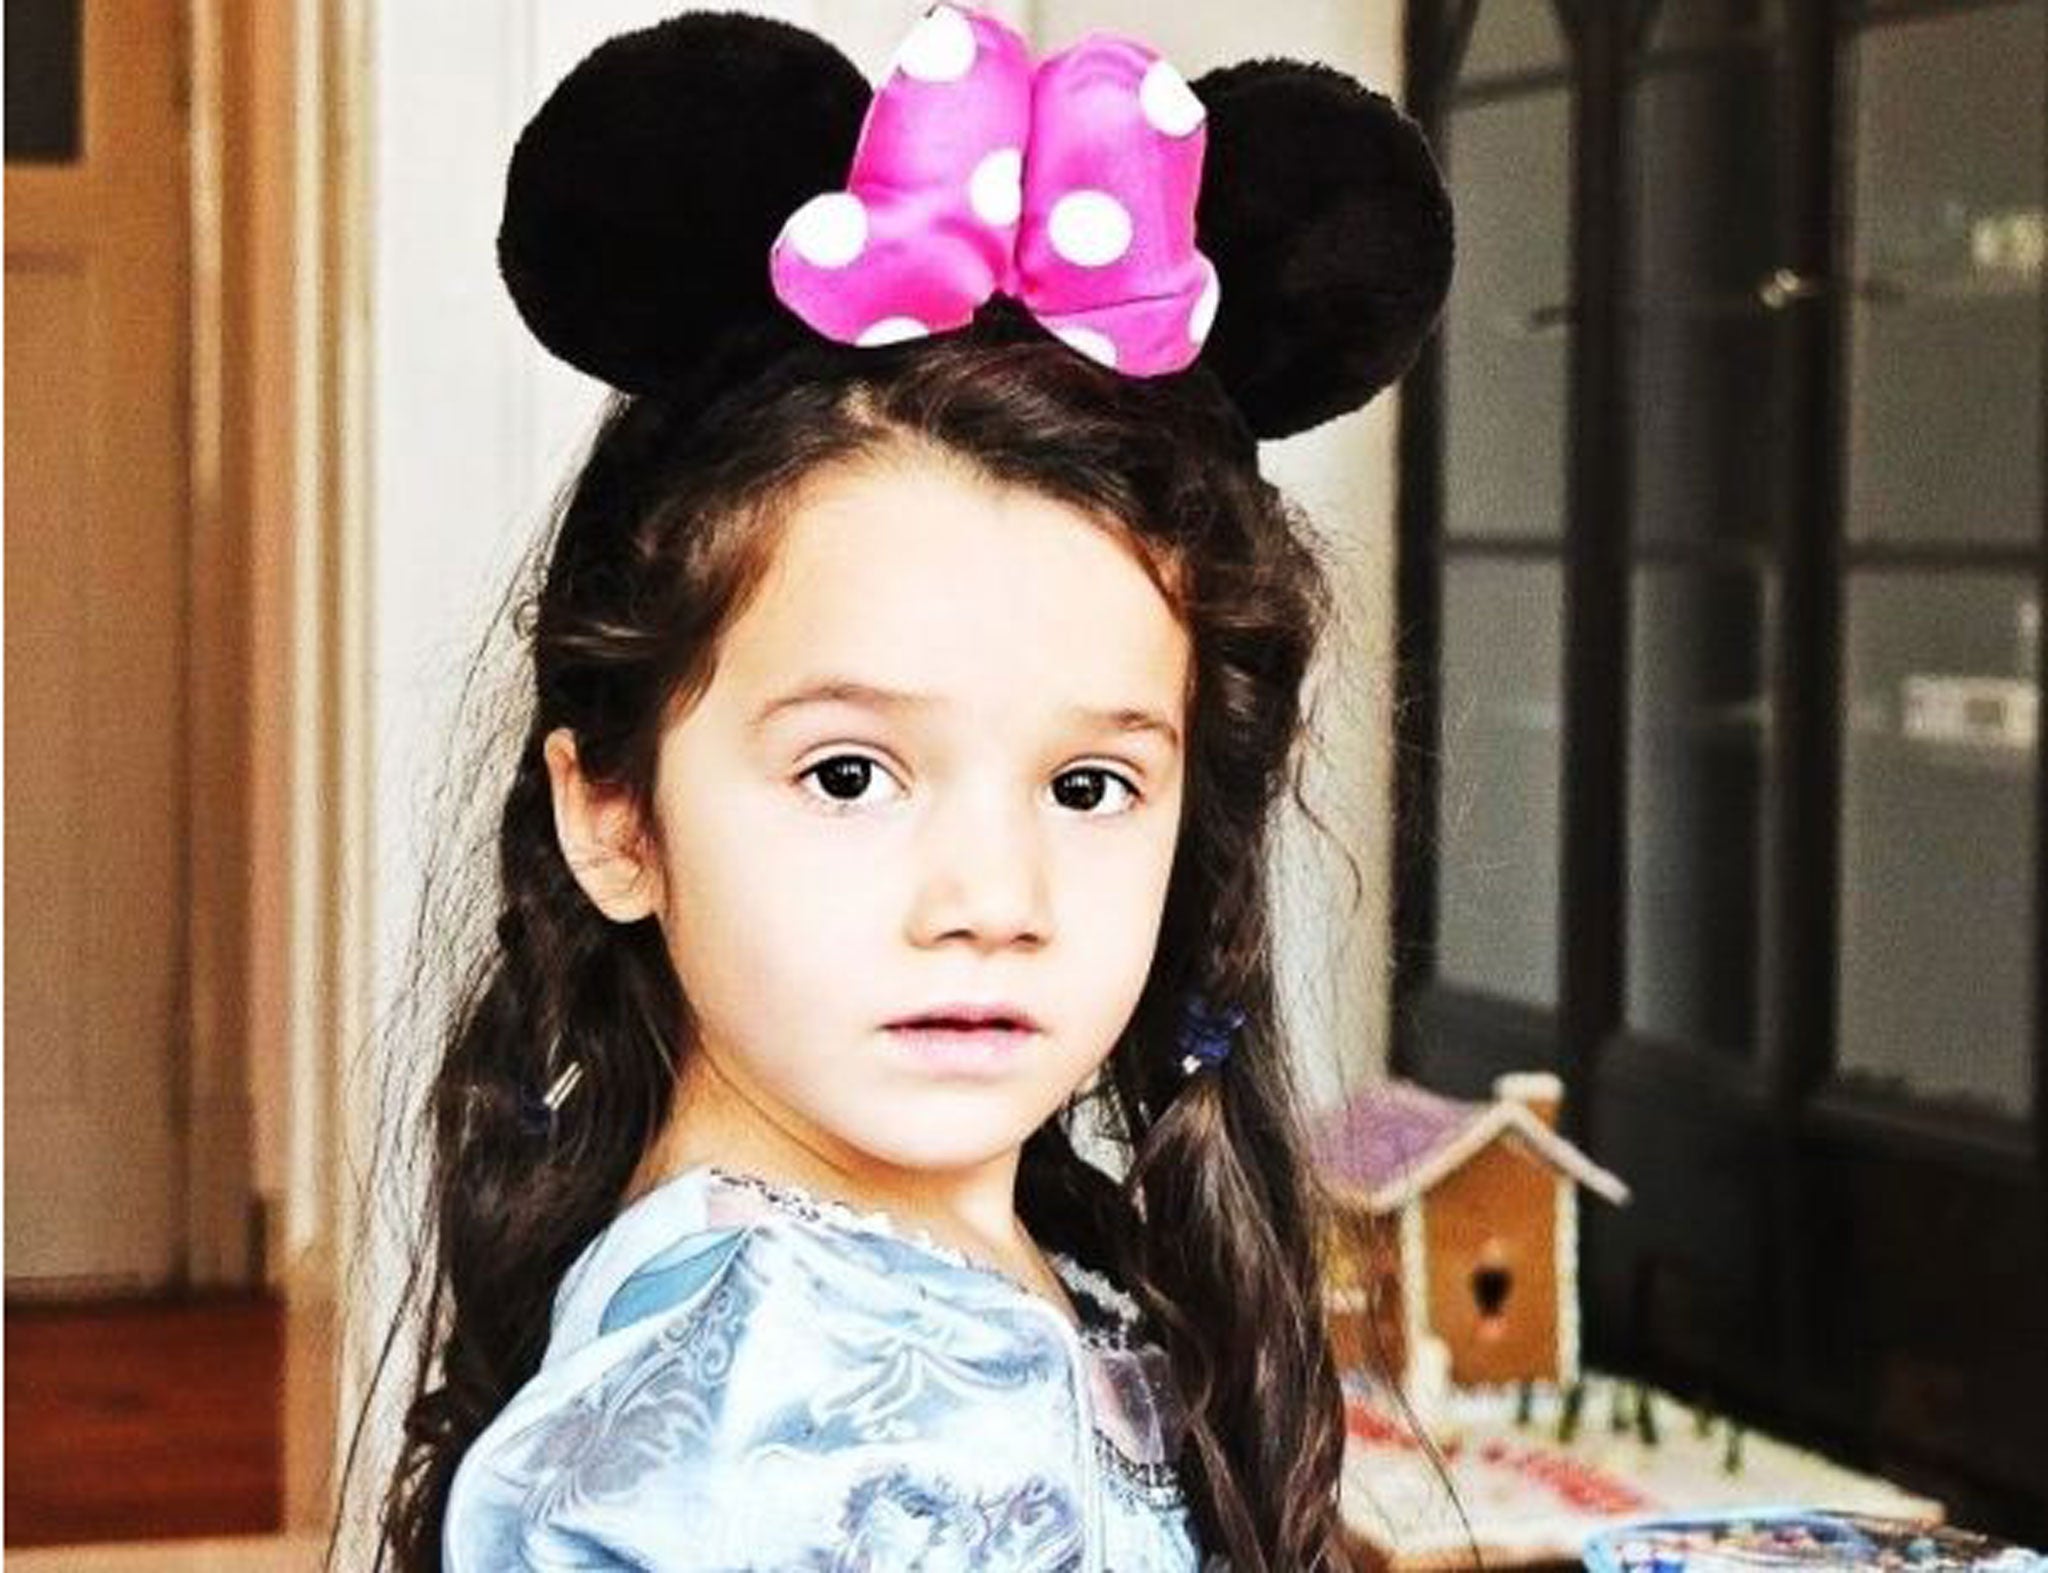 All ears: Michael Volpe’s daughter, Fiora